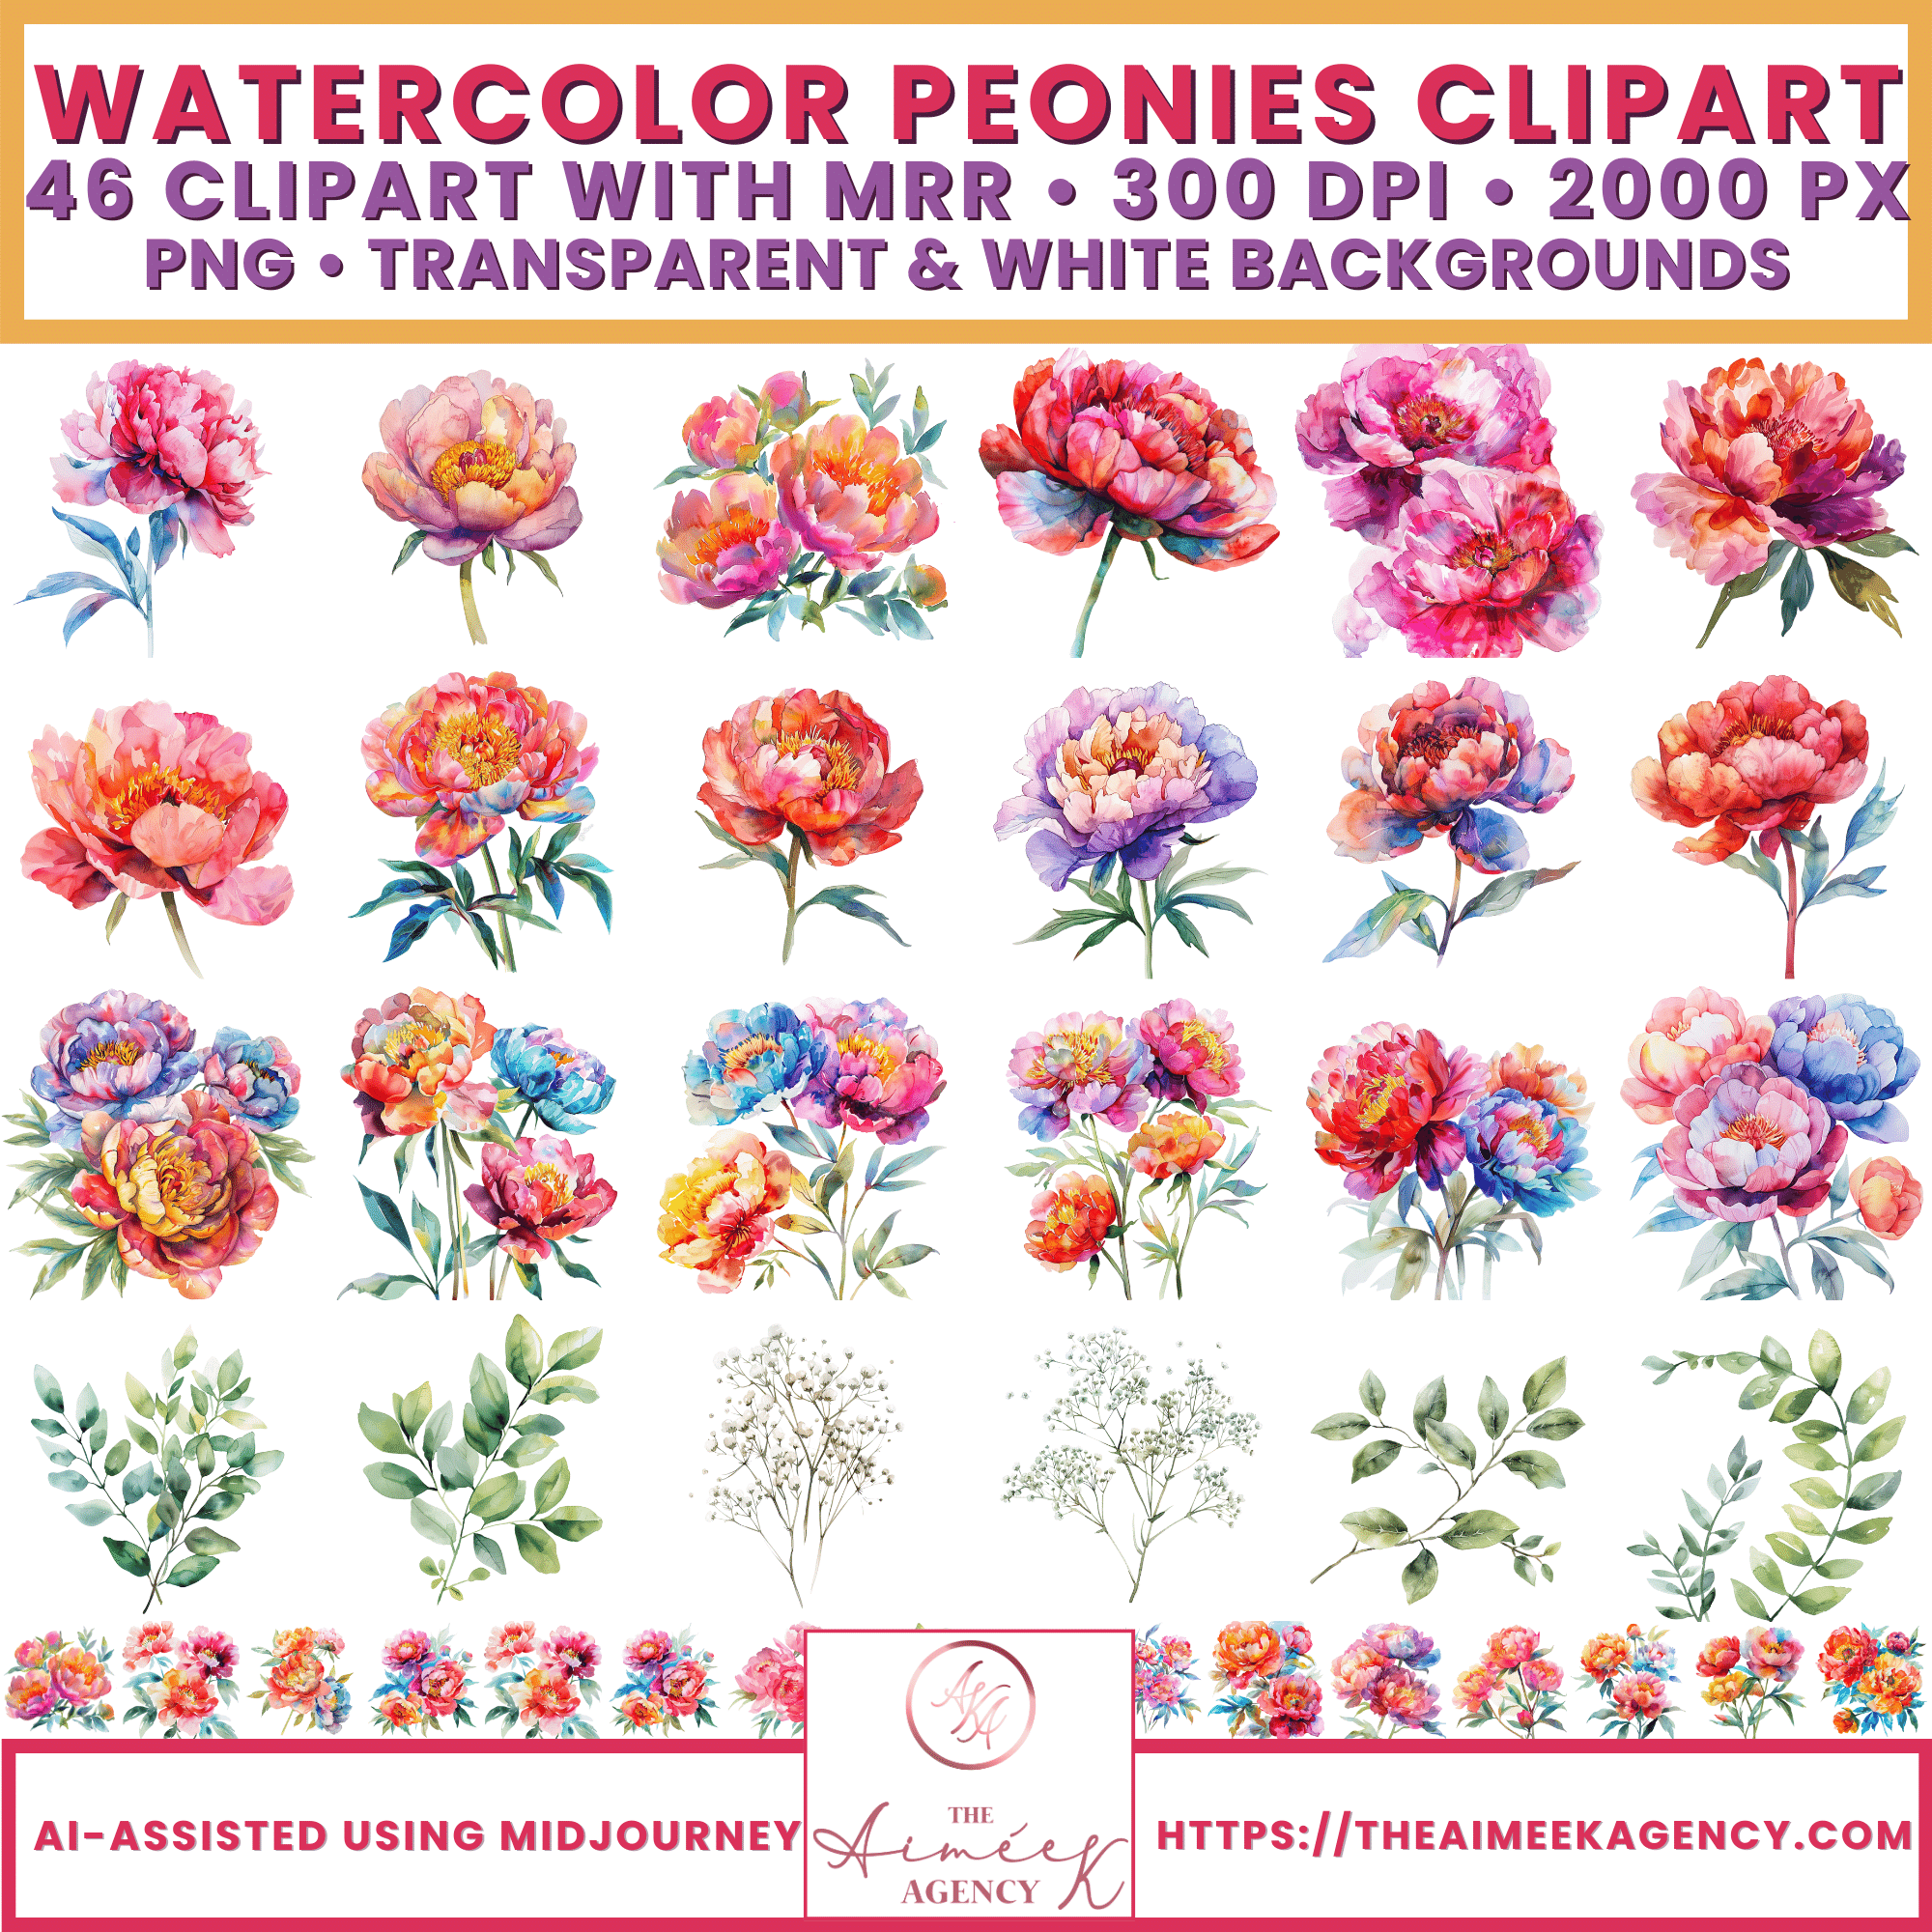 Collection of watercolor peonies clipart in various colors and arrangements, with text promoting digital art attributes and website links.